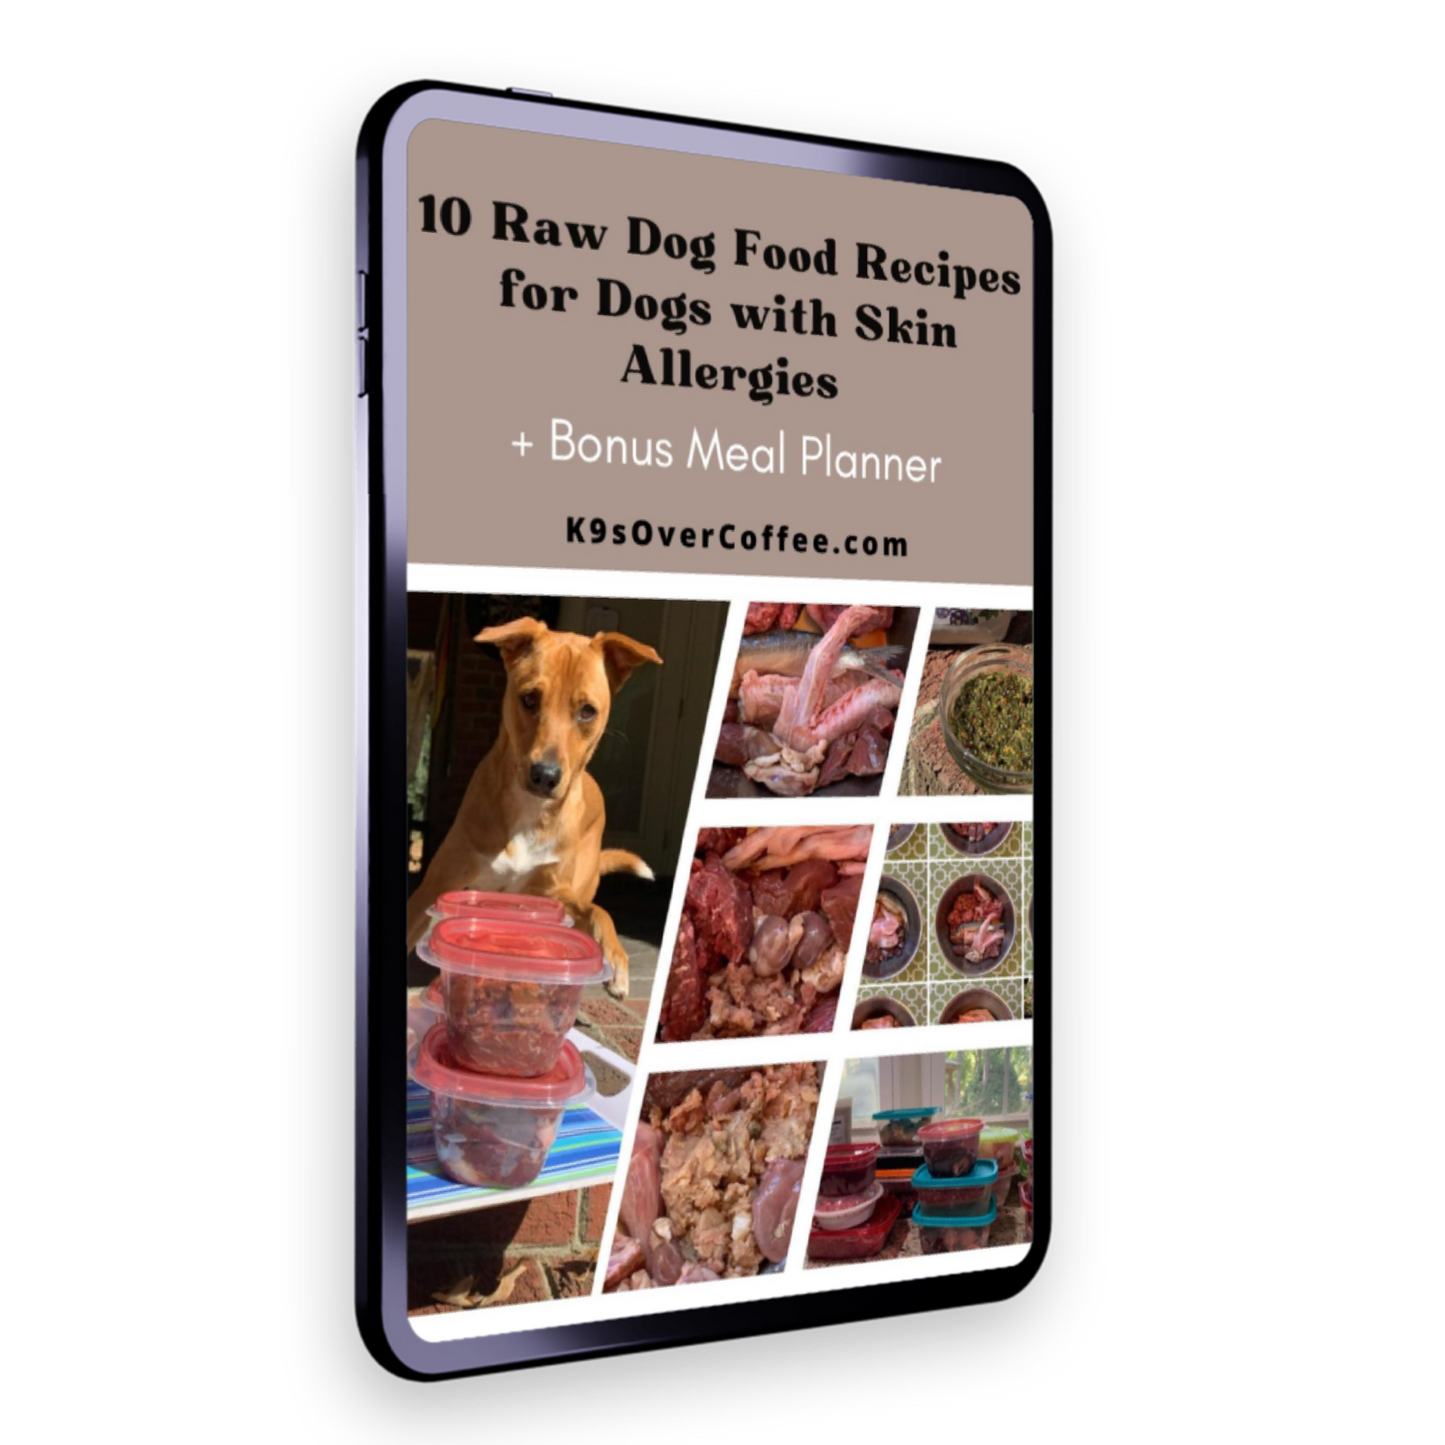 The ebook 10 raw dog food recipes for dogs with skin allergies is part of the discounted raw dog food ebook bundle